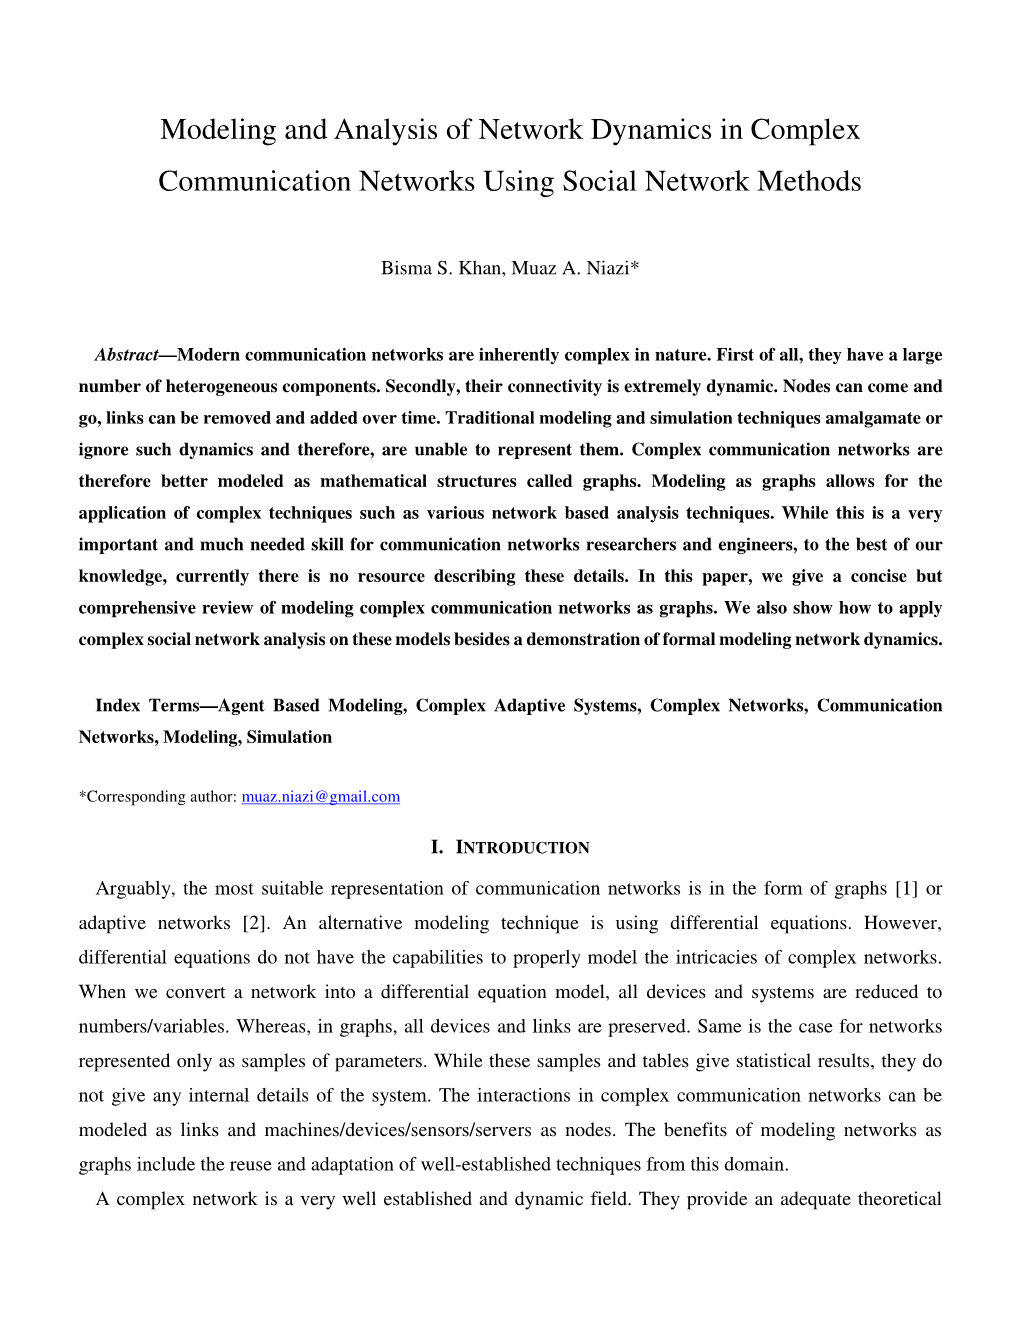 Modeling and Analysis of Network Dynamics in Complex Communication Networks Using Social Network Methods